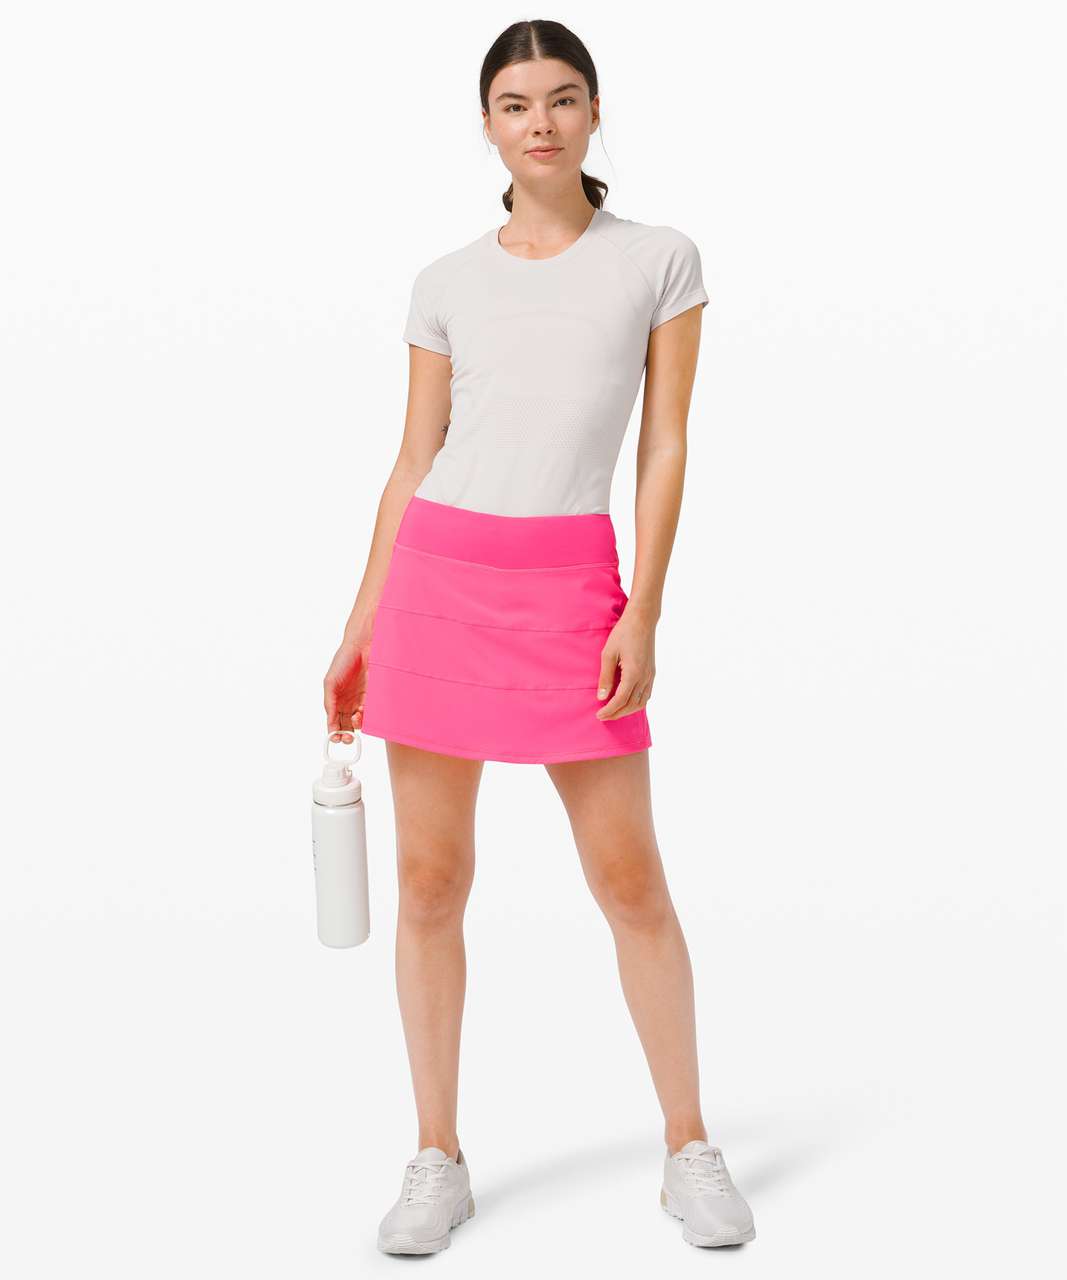 Lululemon Athletica Pace Rival Mid-Rise Skirt (Hyper Flow Pink